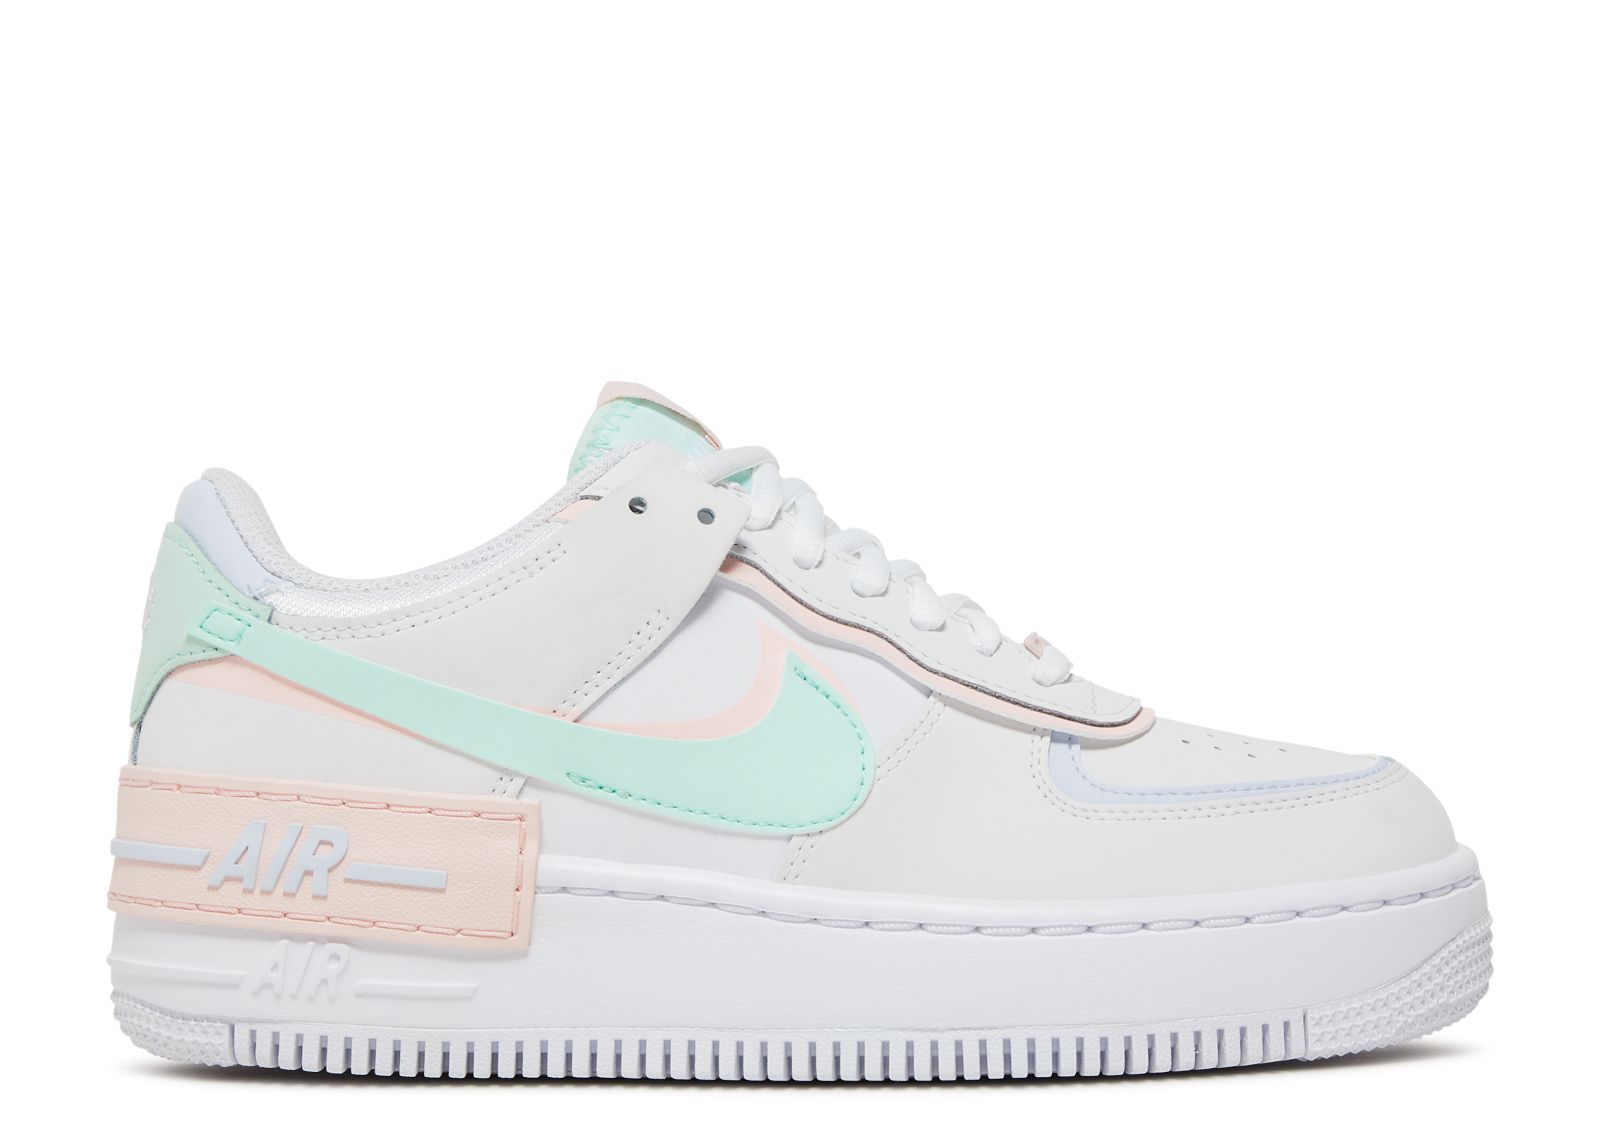 Wmns Air Force 1 Shadow 'White Atmosphere Mint' - Nike - CI0919 117 - white/atmosphere/mint foam/football grey | Flight